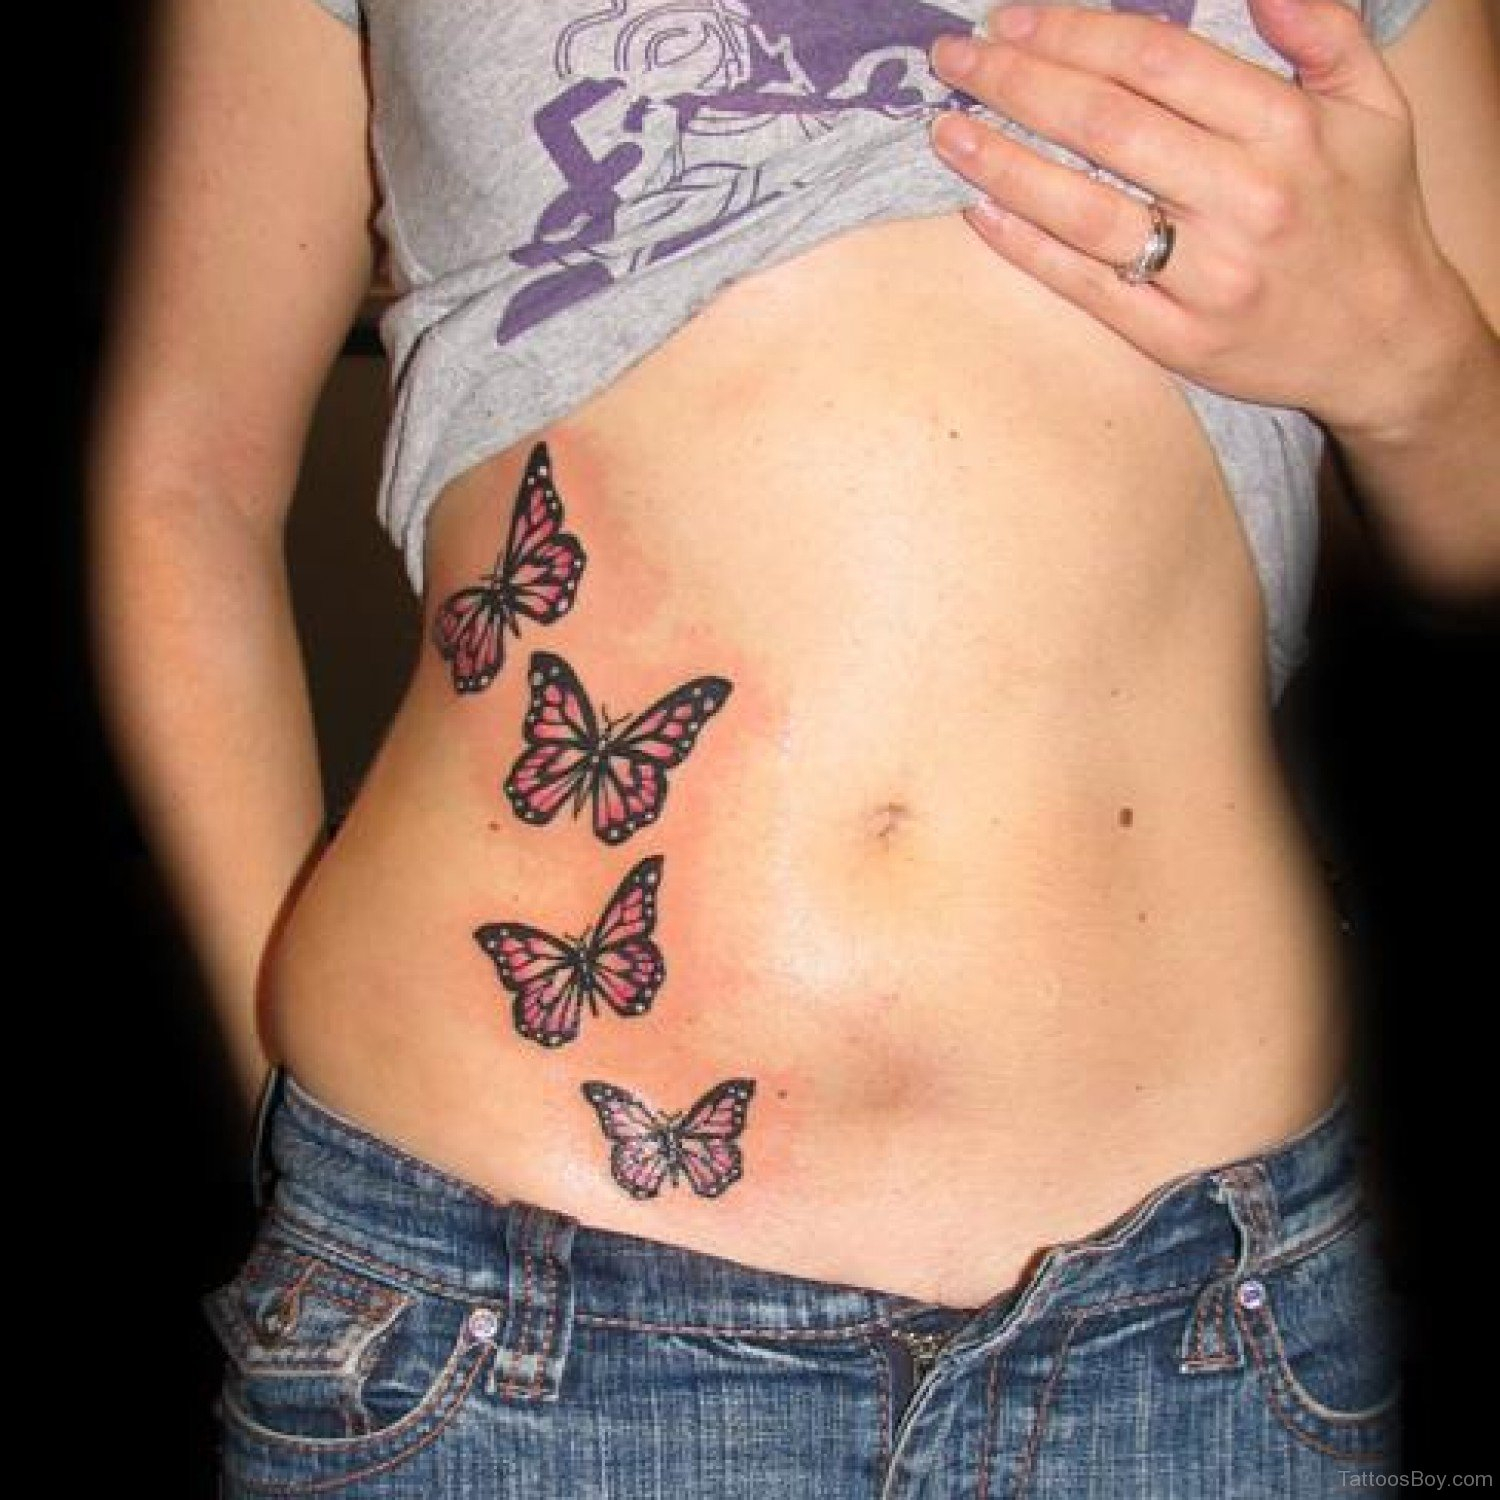 Butterfly Tattoo Design On Stomach Tattoo Designs Tattoo Pictures inside measurements 1500 X 1500